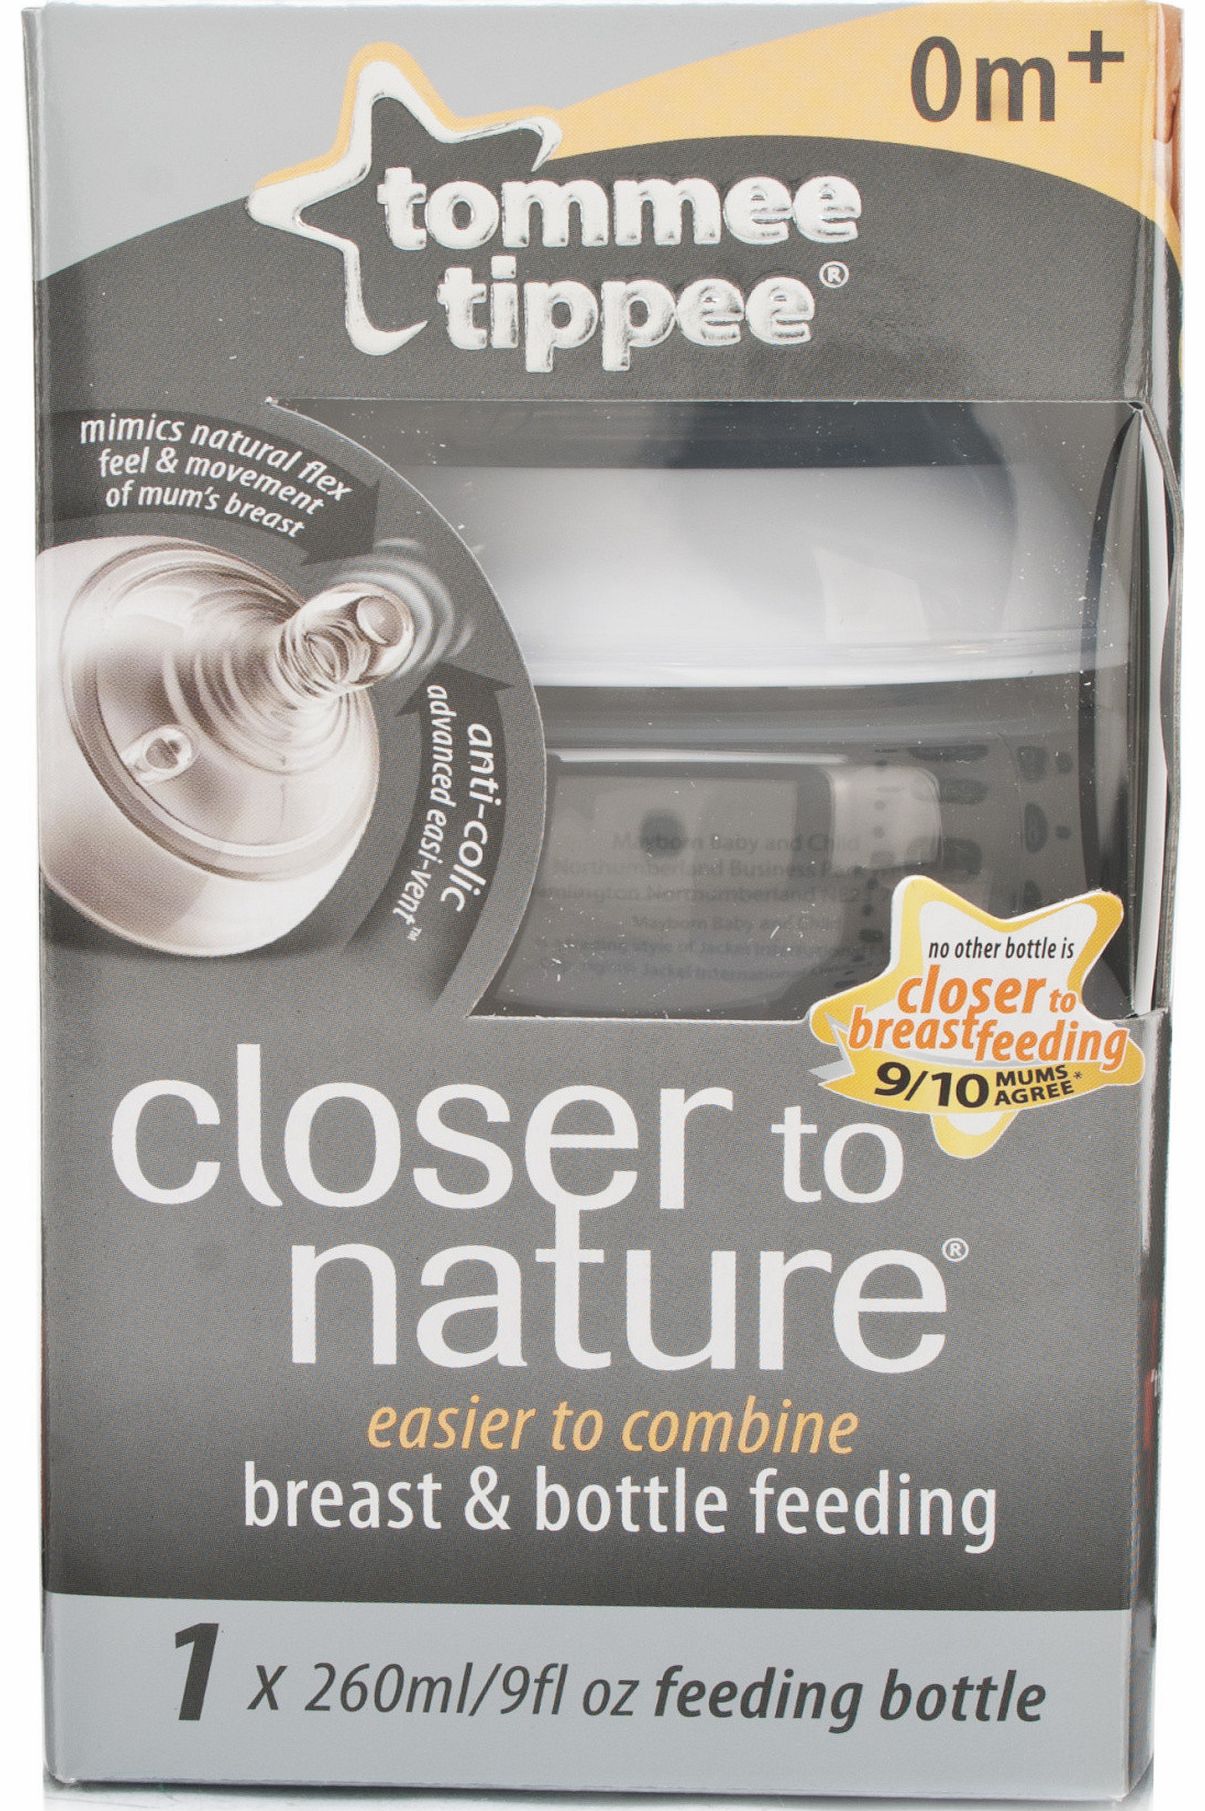 Closer to Nature Tommee Tippee Closer to Nature Easivent Bottle